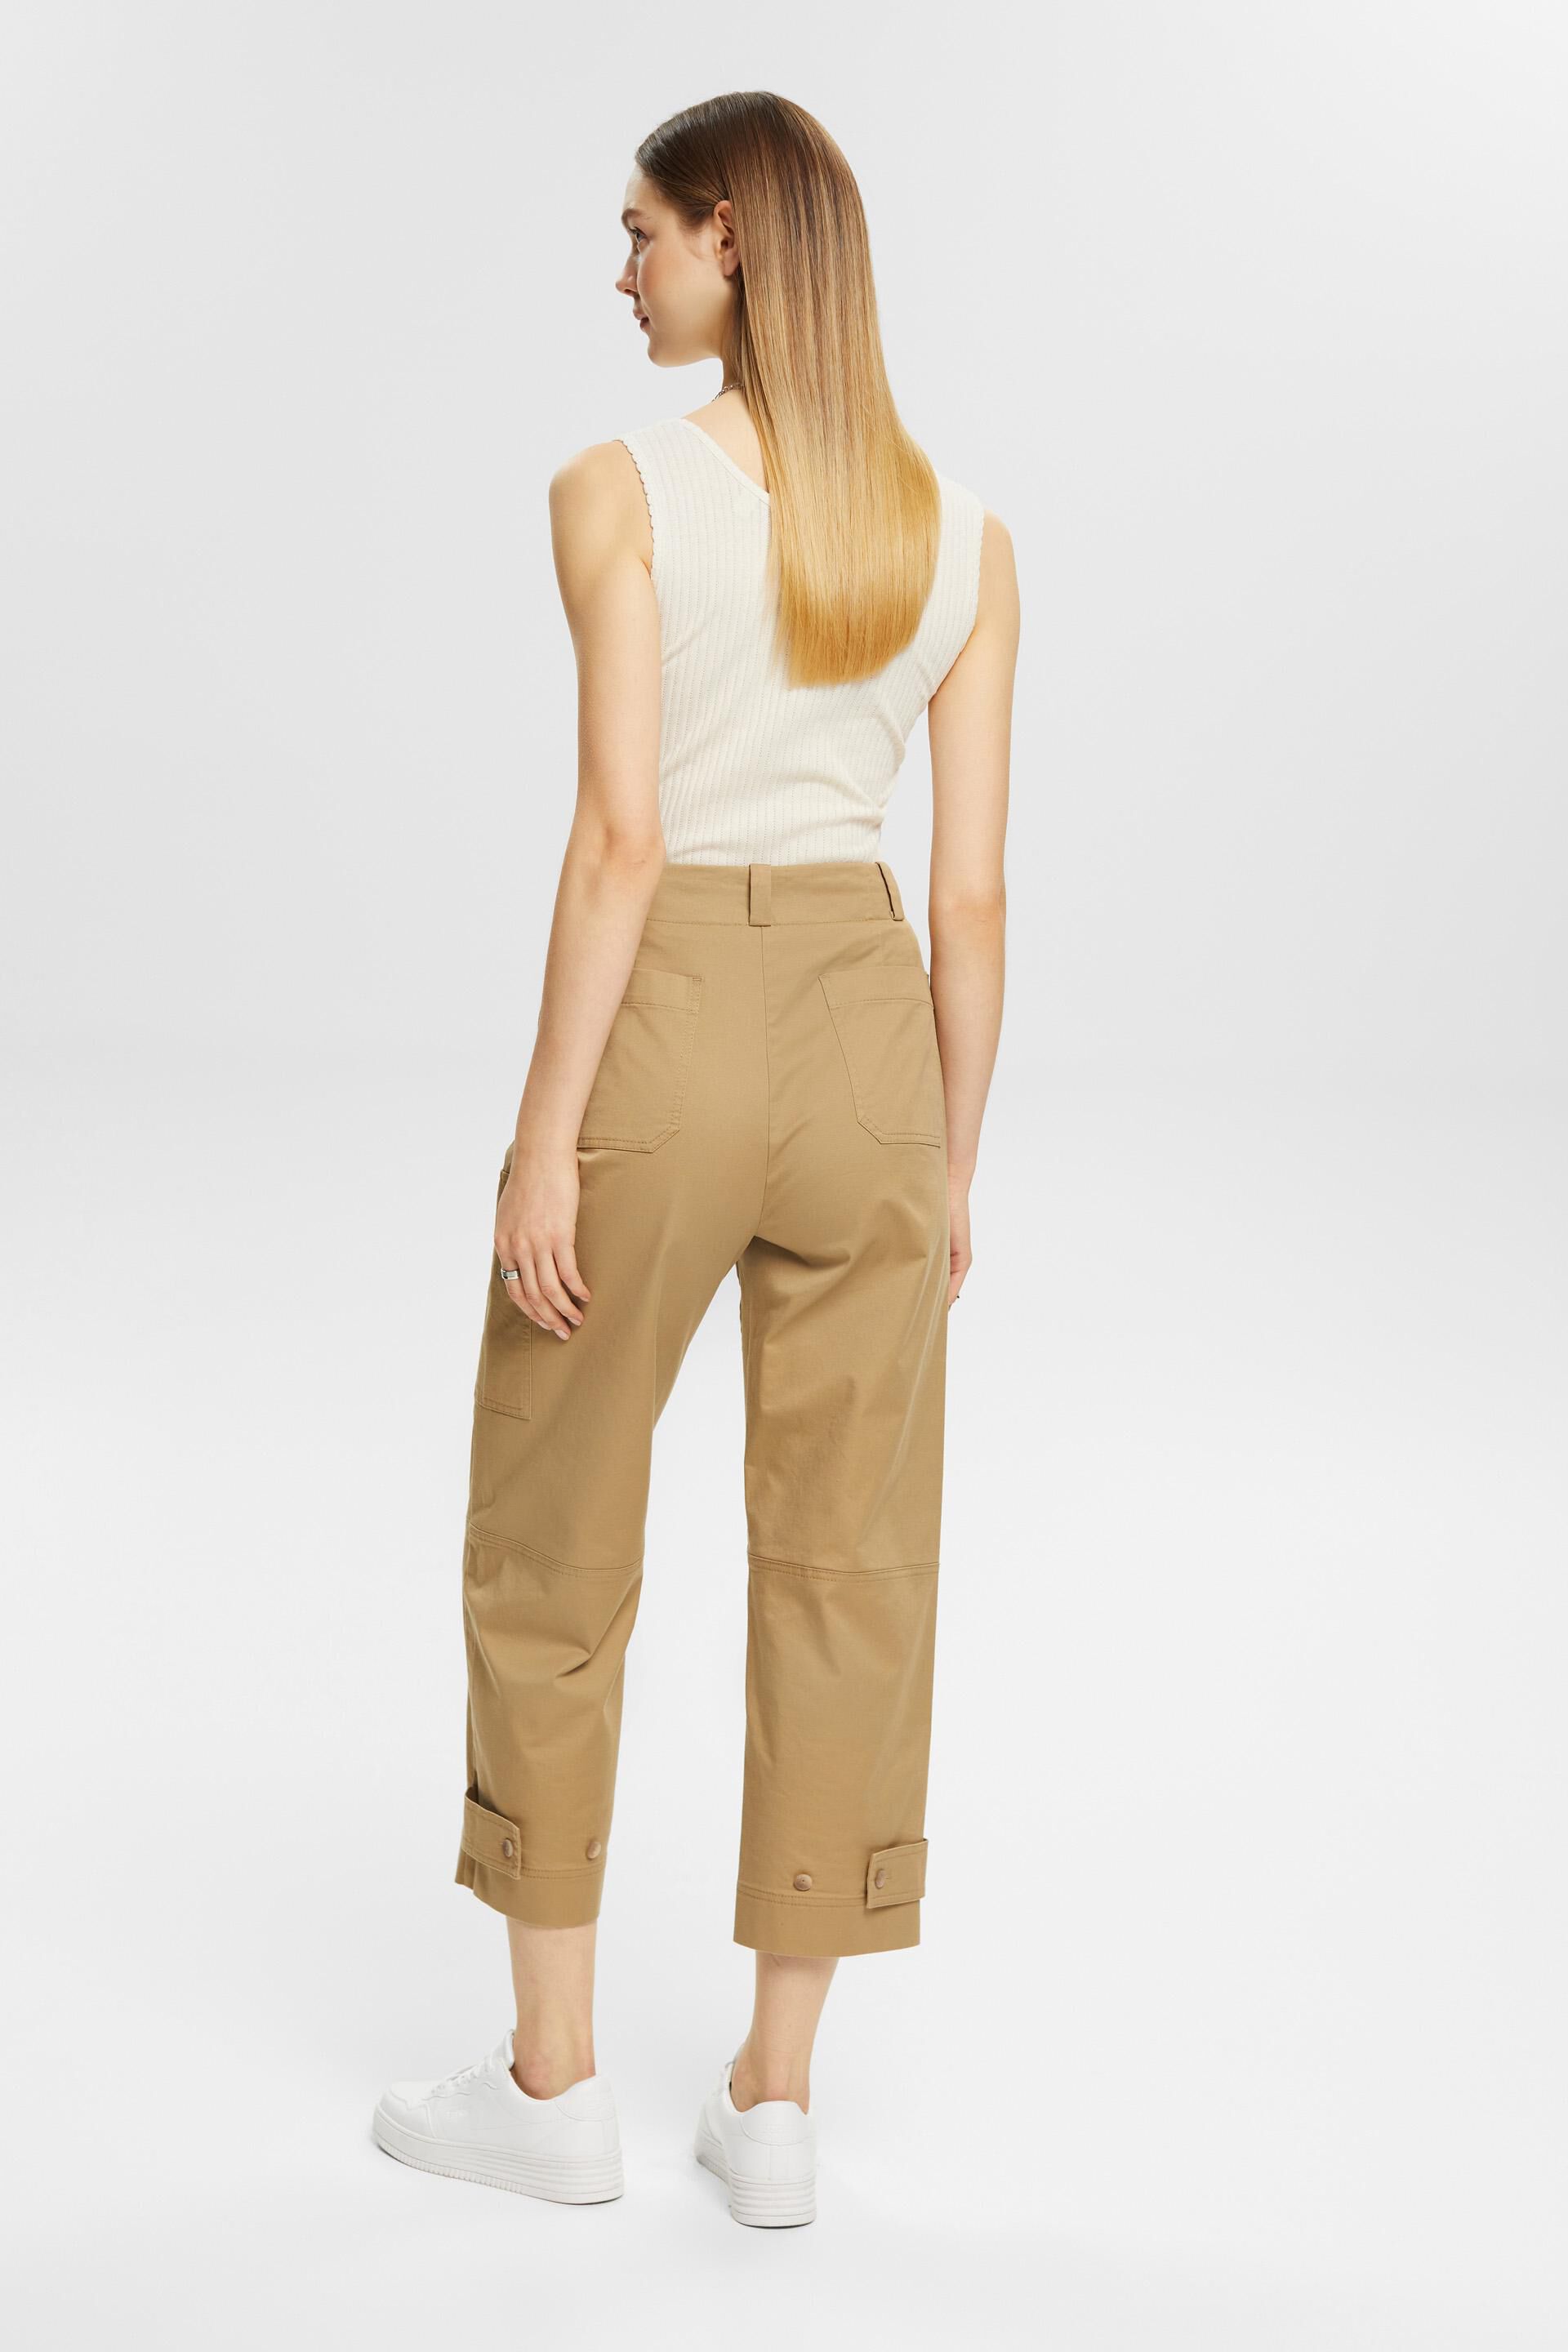 Buy Max Women's Slim Casual Pants (BTM2802_Olive Green_XS) at Amazon.in